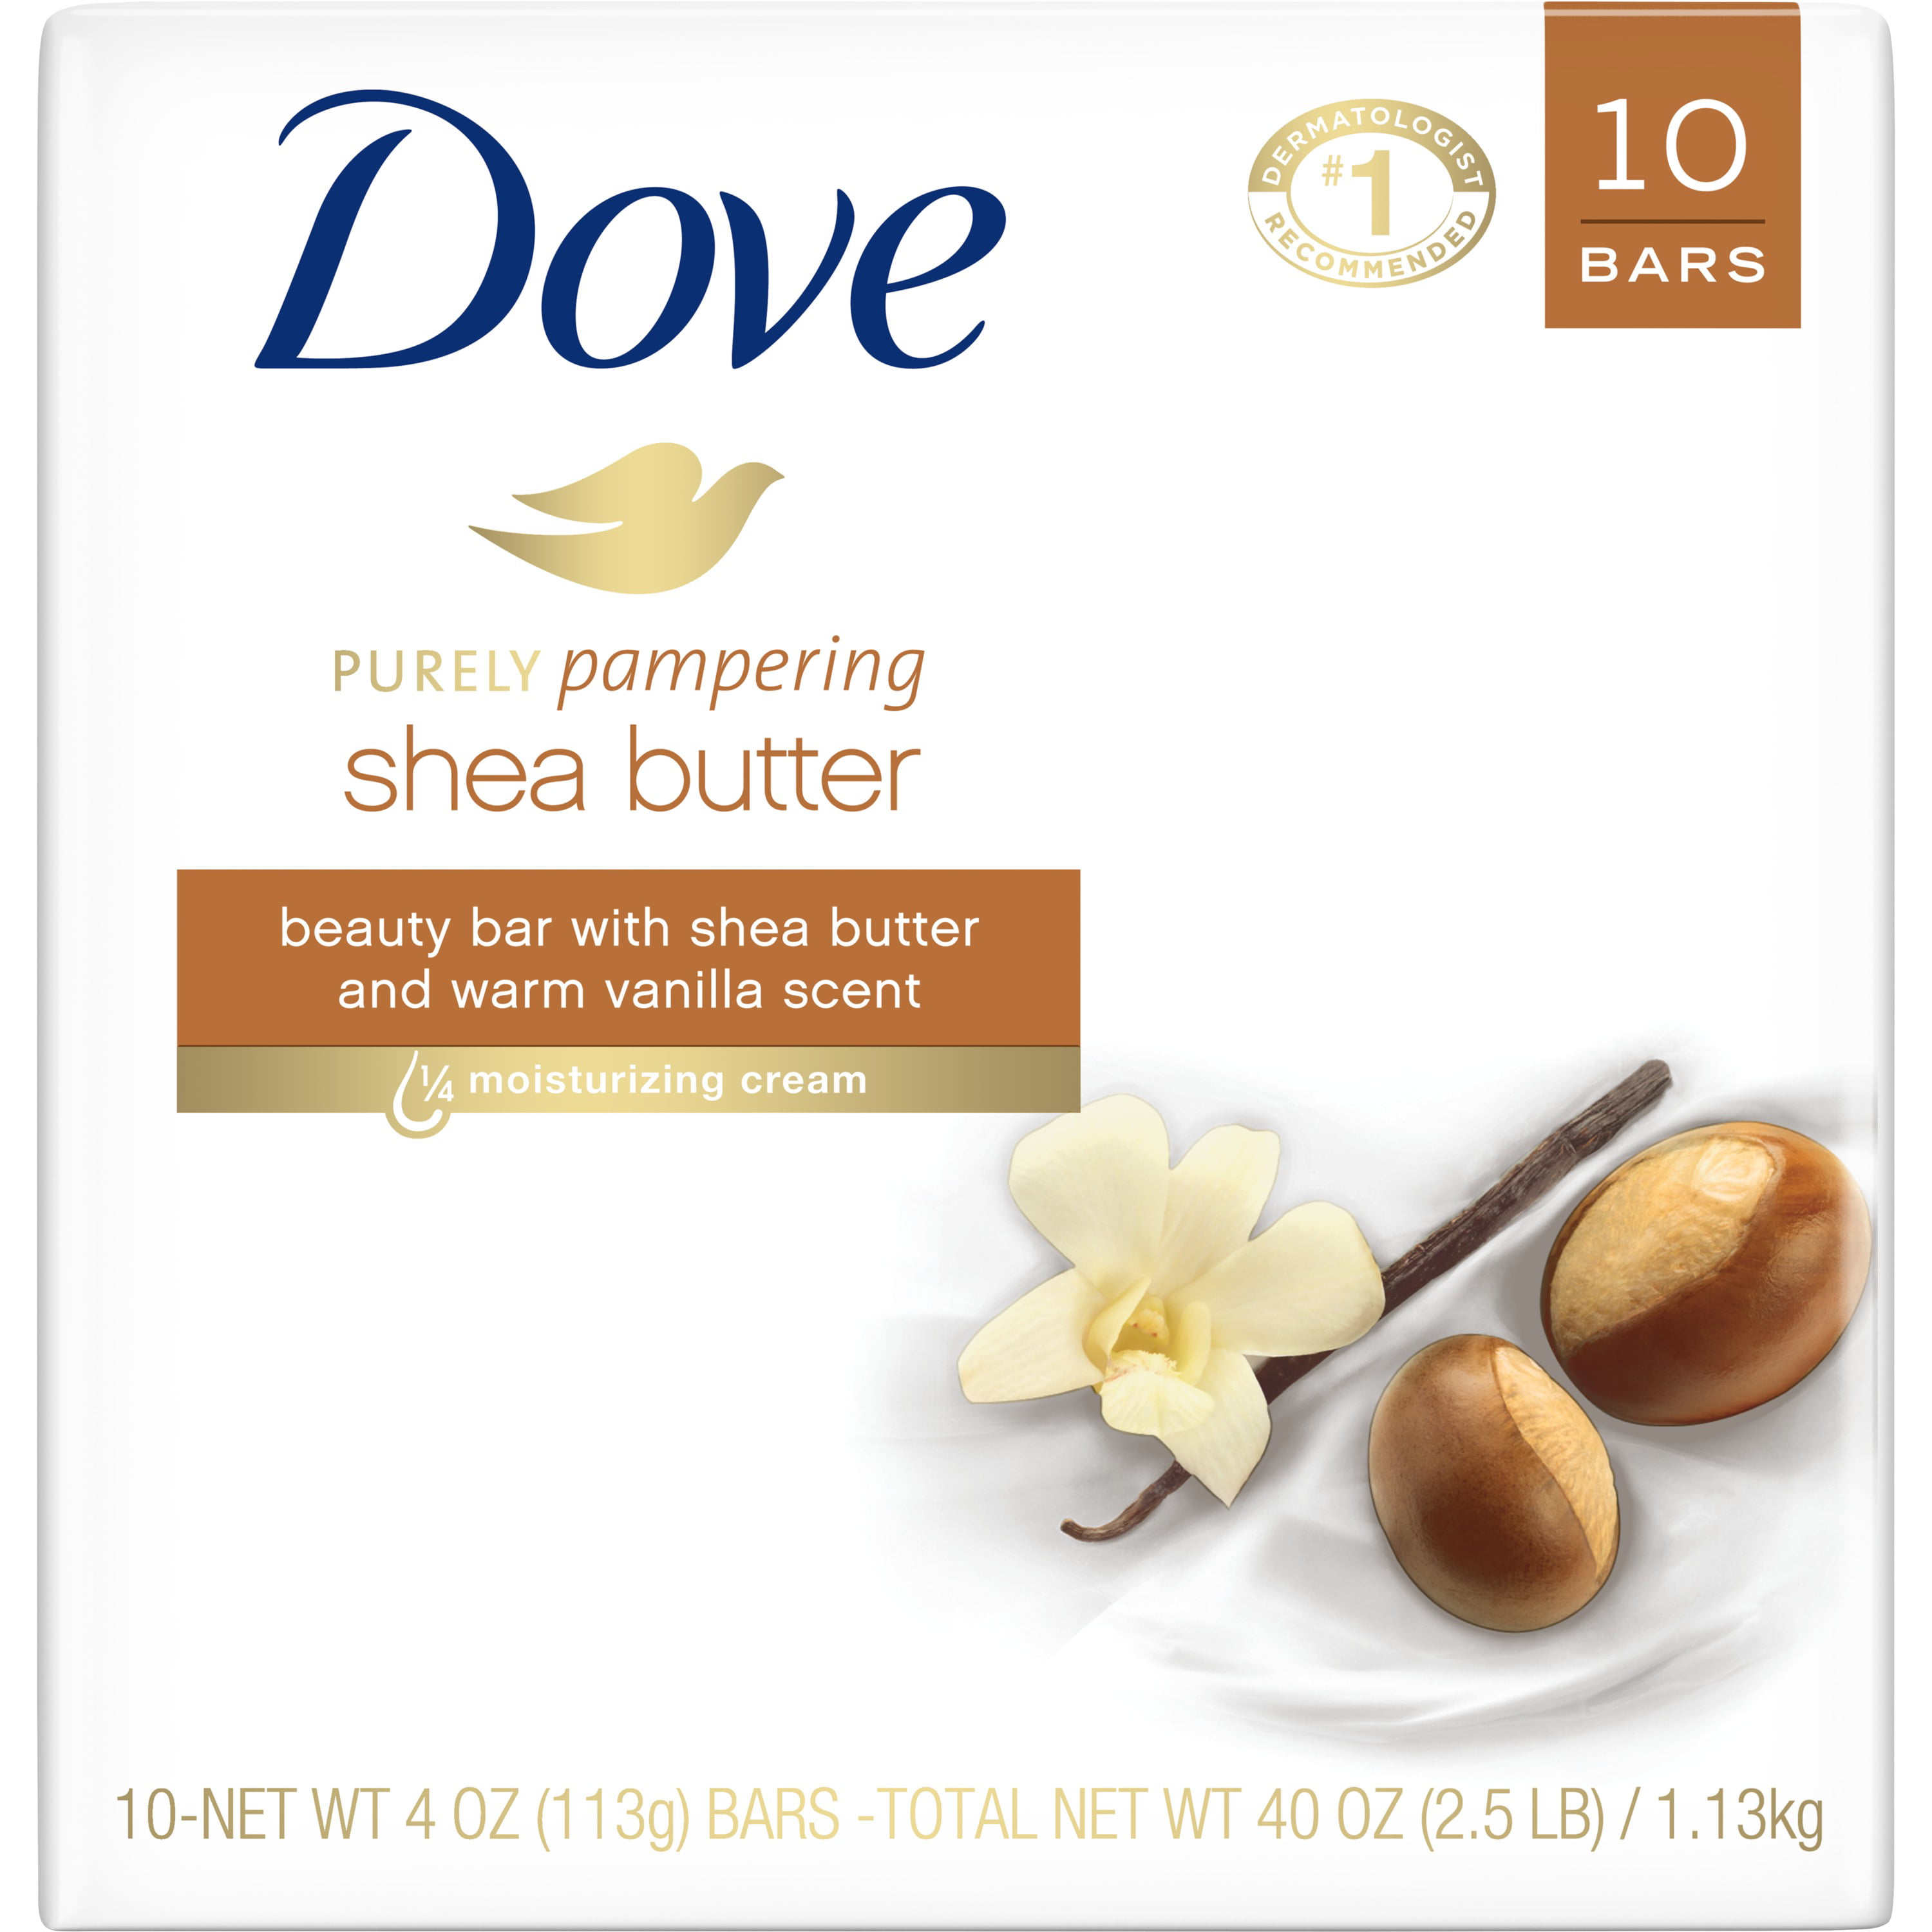 Dove Purely Pampering Beauty Bar, Shea Butter - 8 pack, 4 oz bars